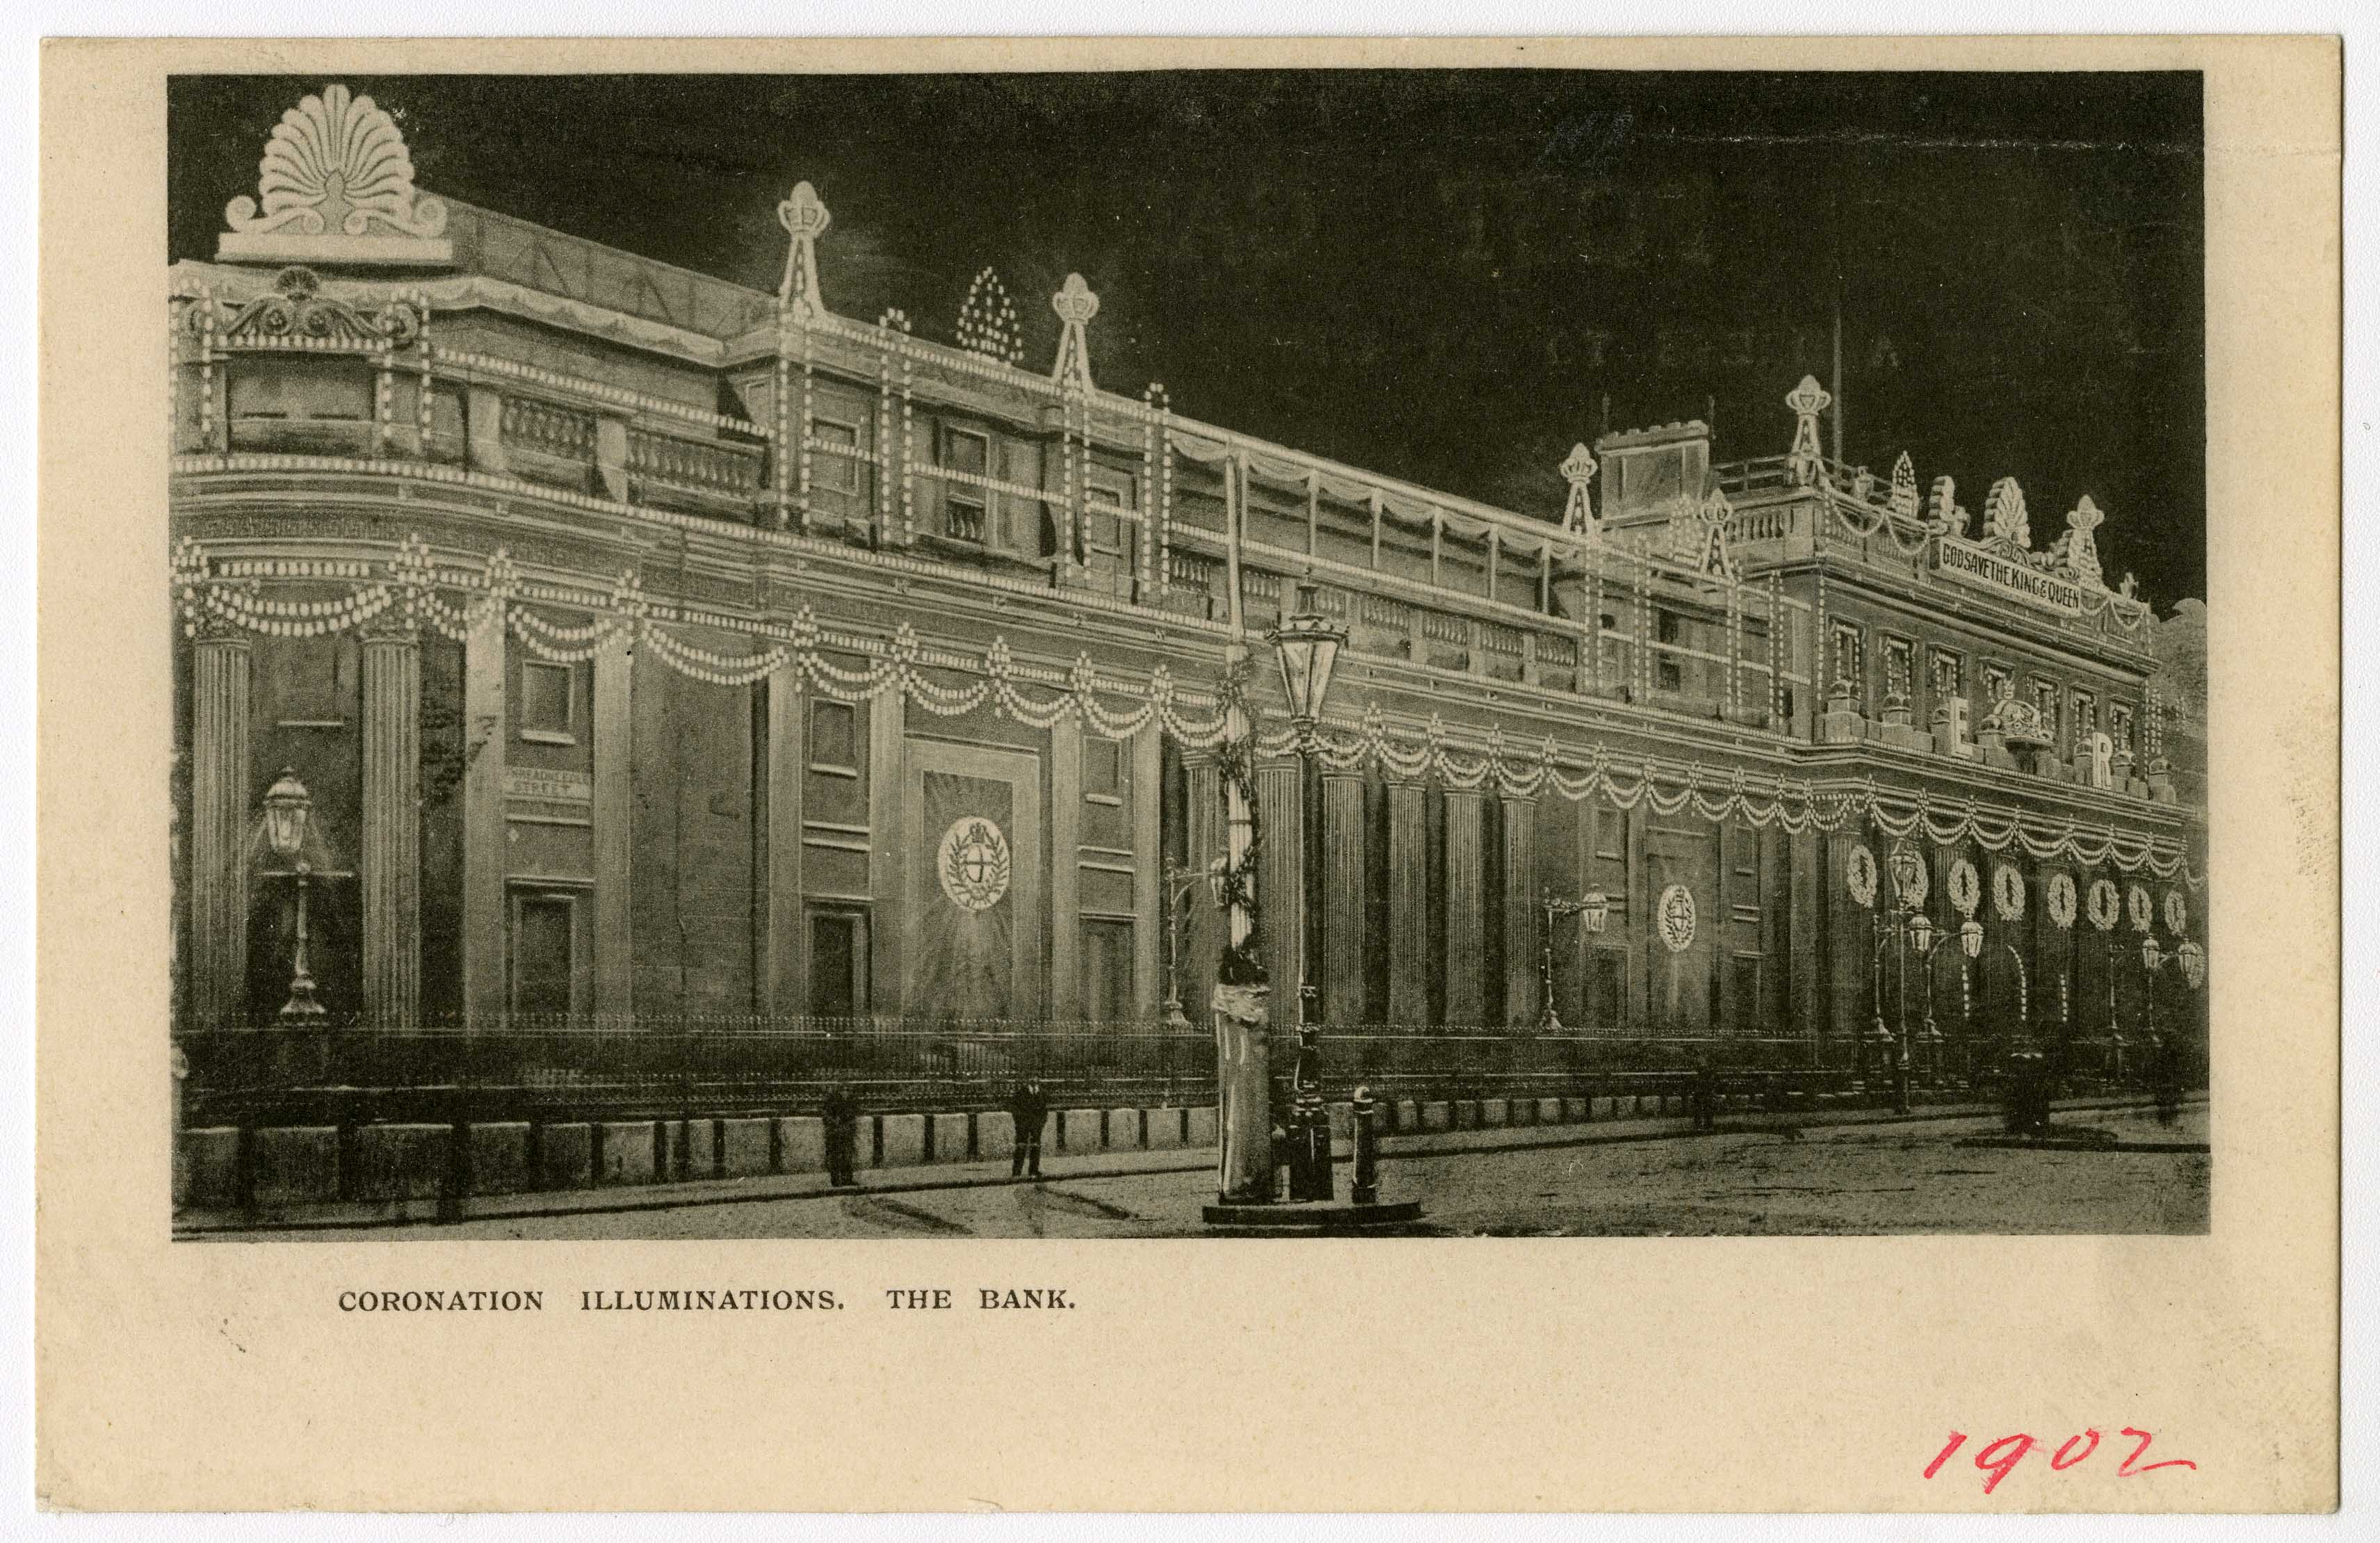 A black and white photograph of the Bank of England at Threadneedle Street in 1902, at night. The bank is decorated with banners and the initials E R, for the coronation of Edward VII. Most of the scene is in darkness but the illuminated banners and strings out lights show up clearly. 